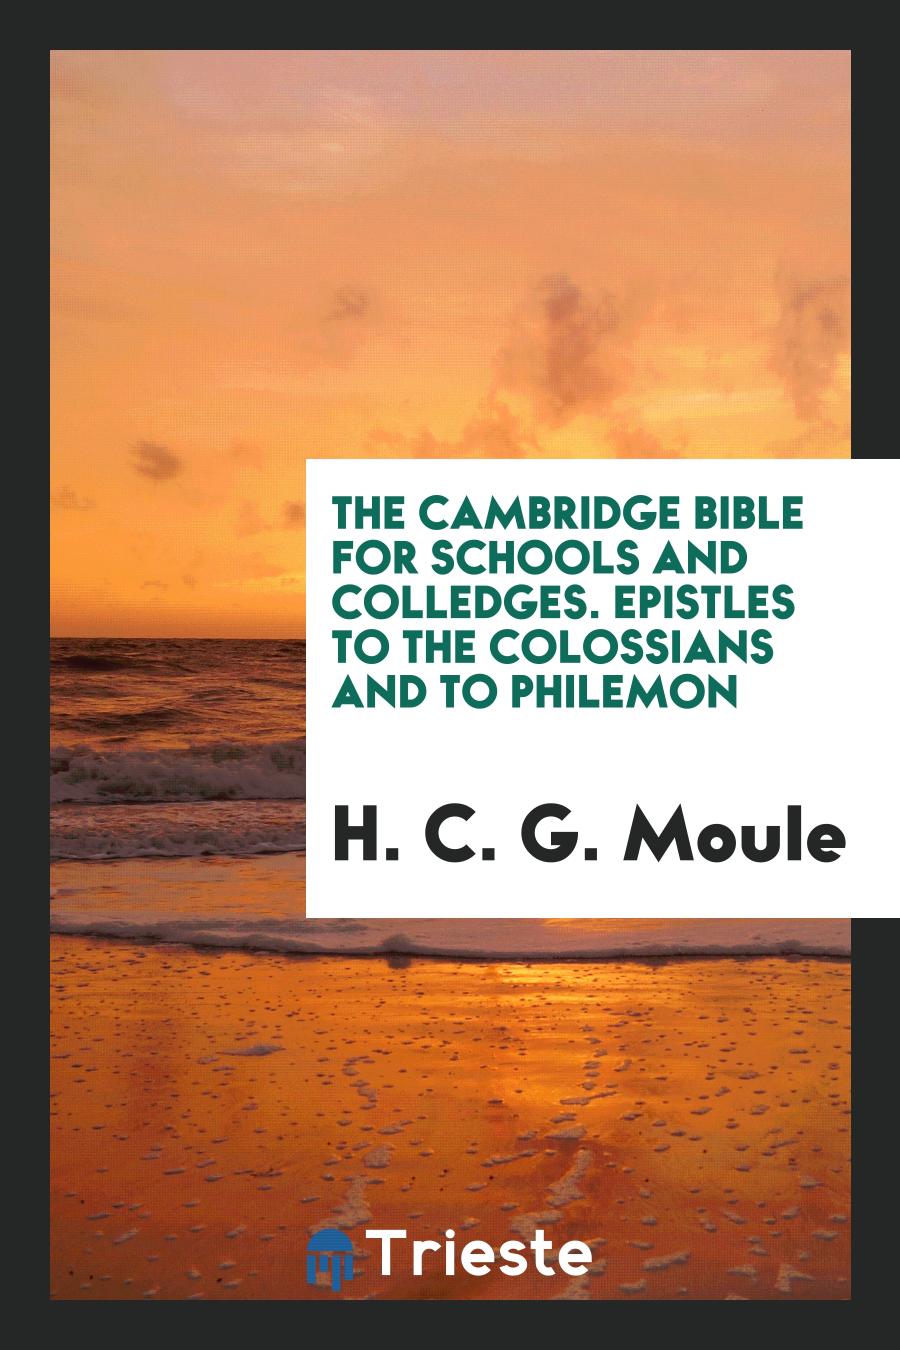 The Cambridge Bible for Schools and Colledges. Epistles to the Colossians and to Philemon